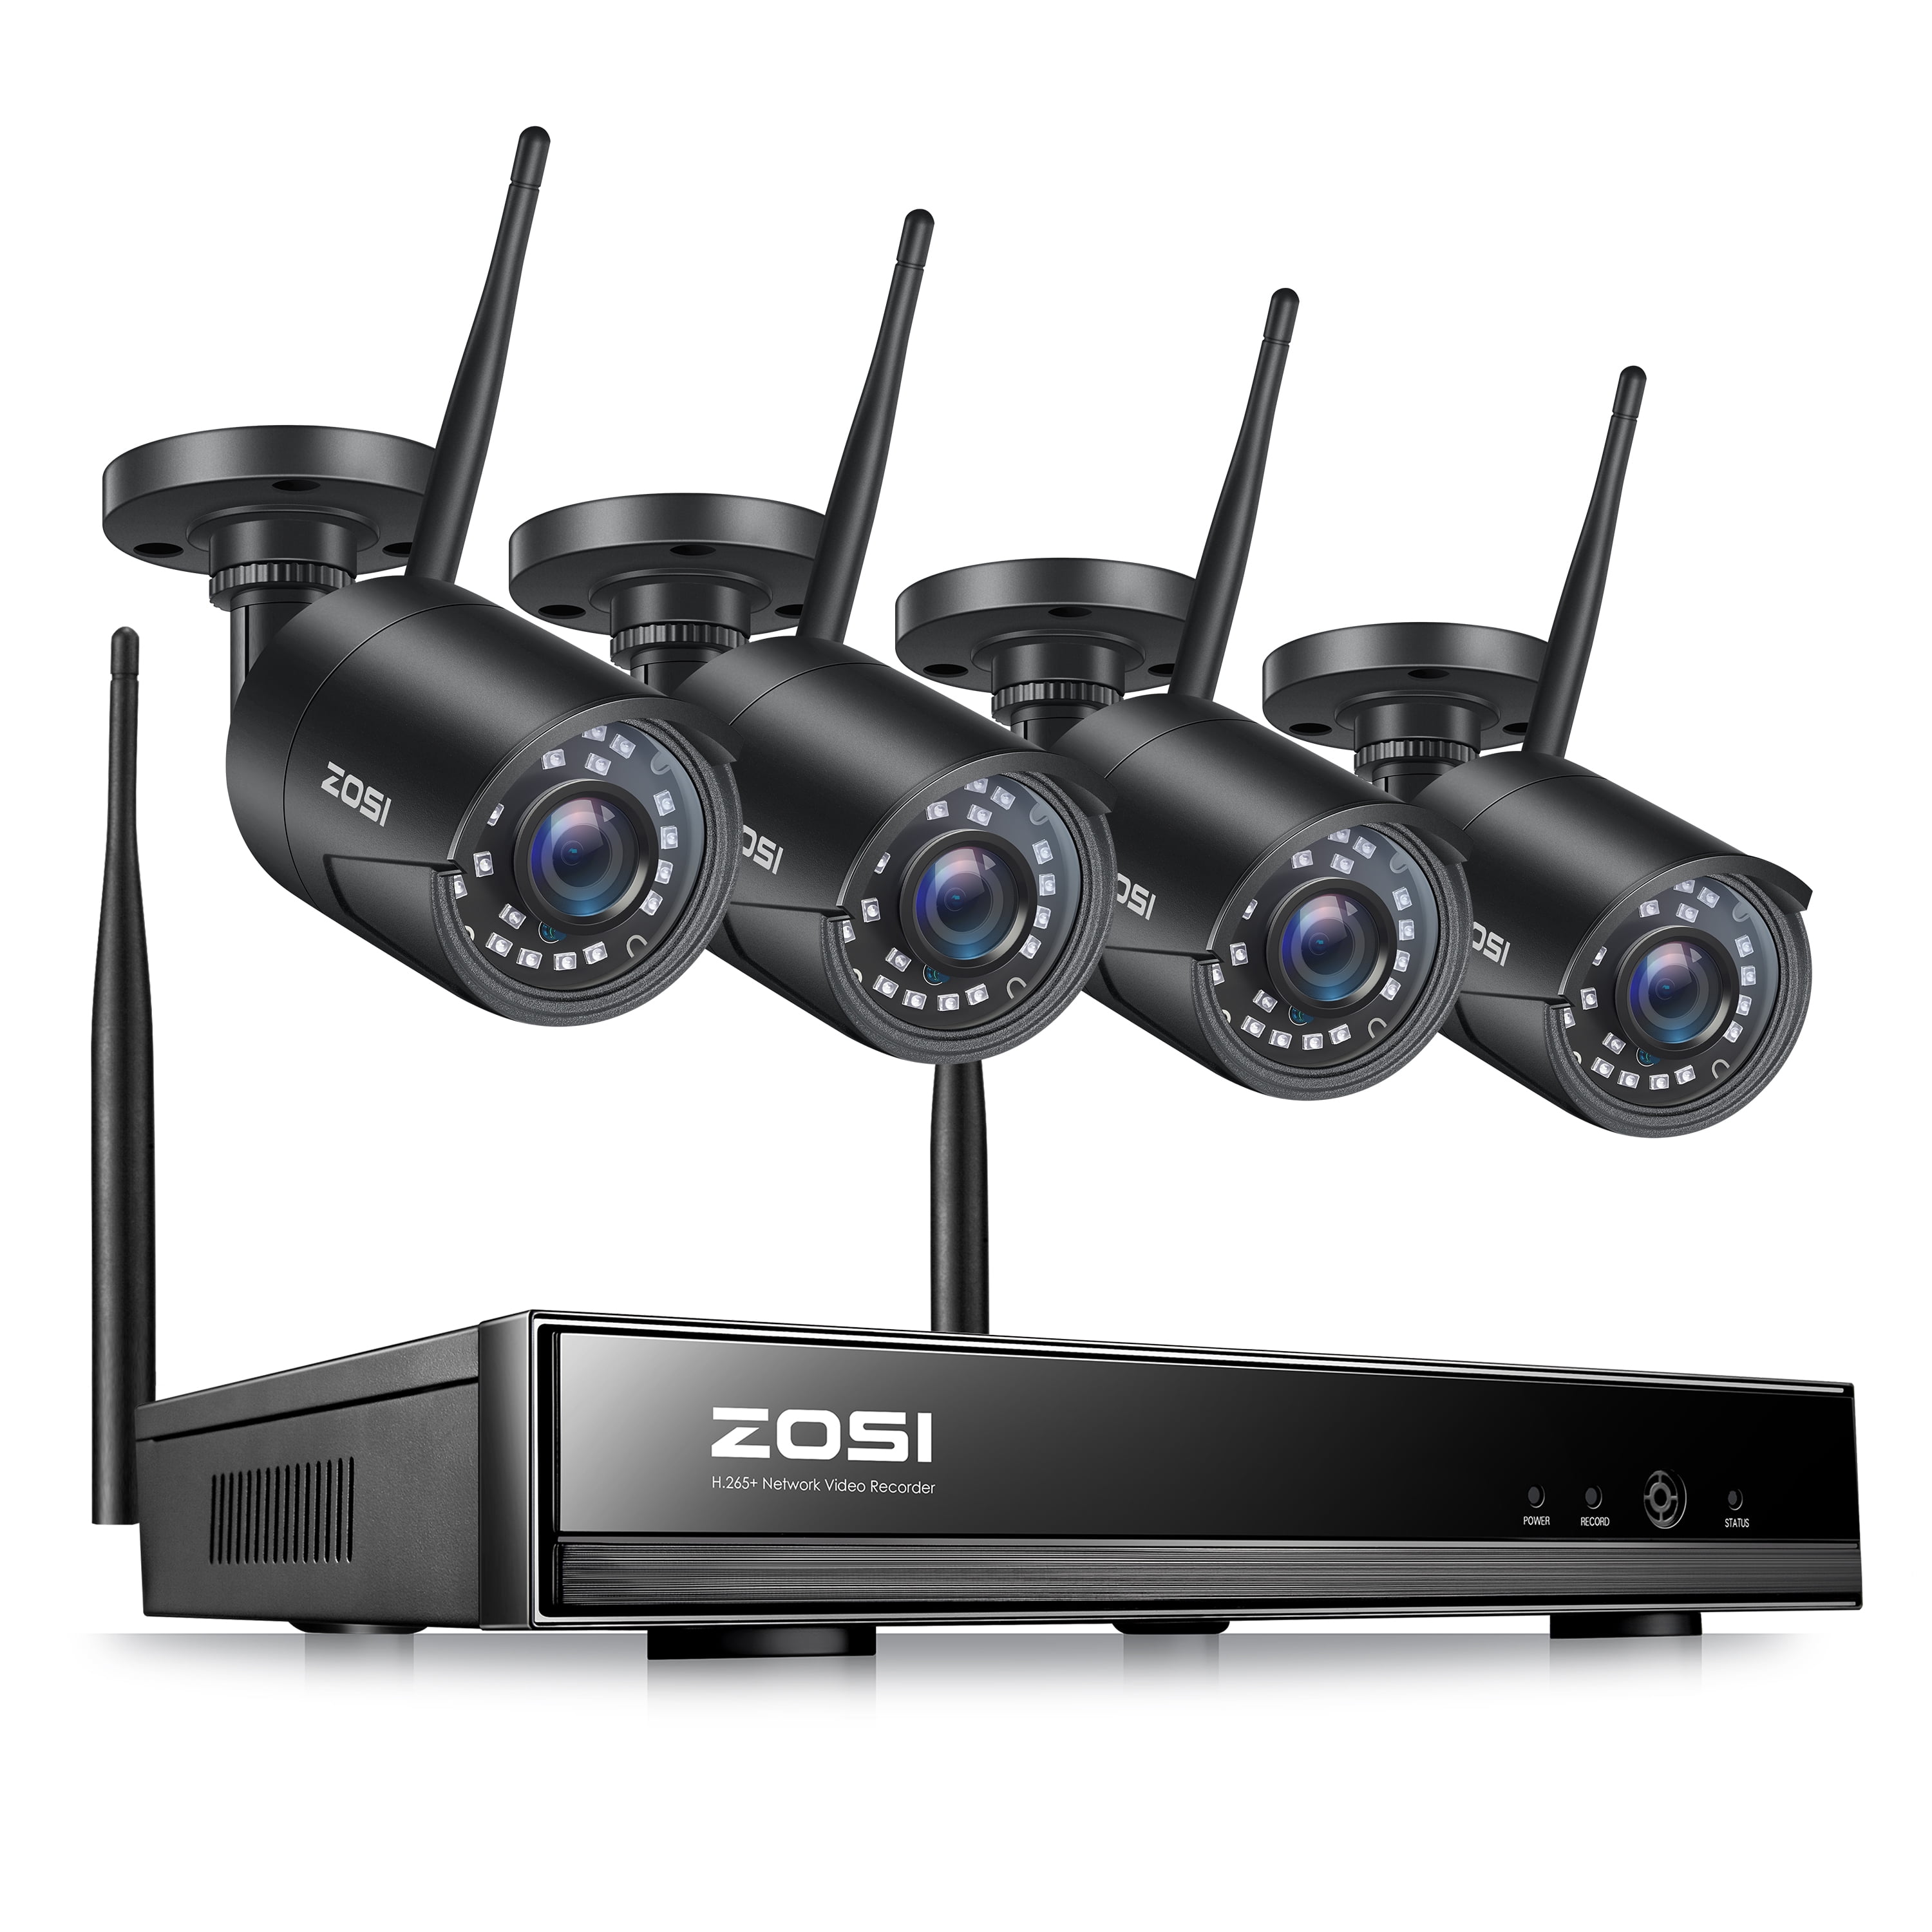 Remote Access ZOSI 8CH PoE Home Security Camera System,H.265 8 Channel 5MP NVR Recorder with 2TB Hard Drive,8pcs Wired 1080P Outdoor Indoor PoE IP Dome Cameras with Night Vision Motion Alert 